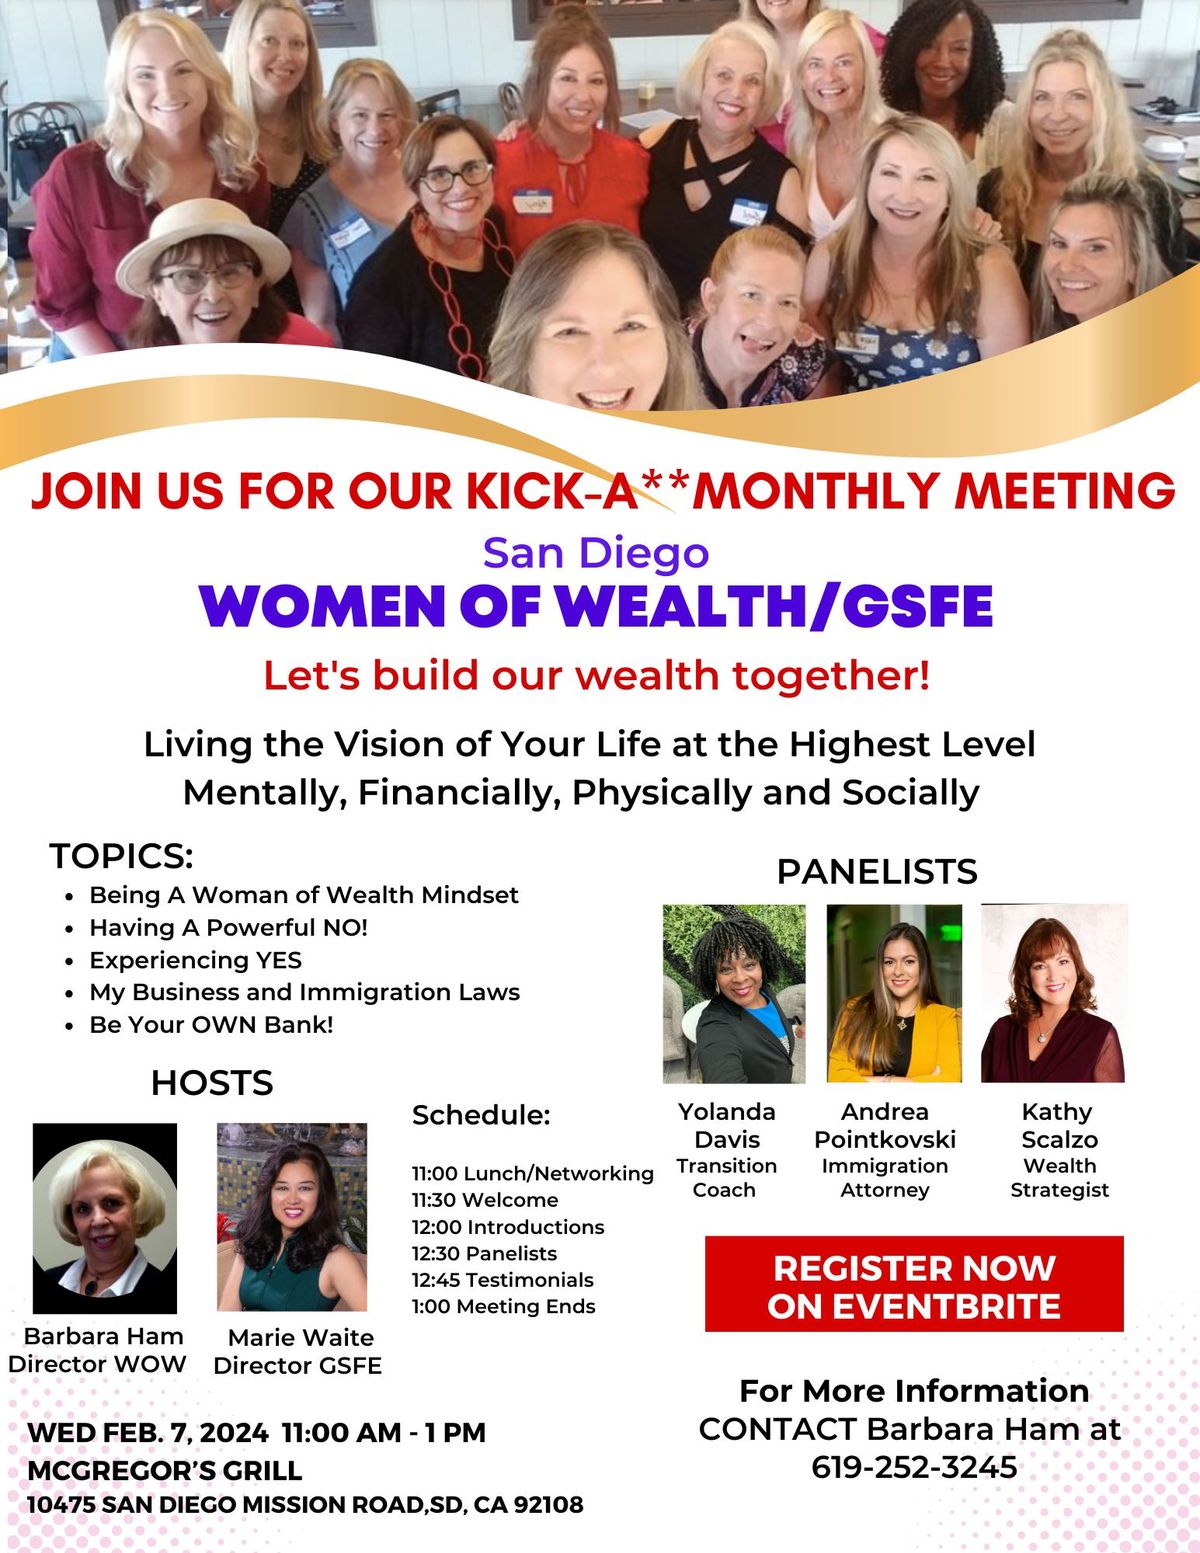 Women of Wealth and GSFE Central San Diego Monthly Meeting